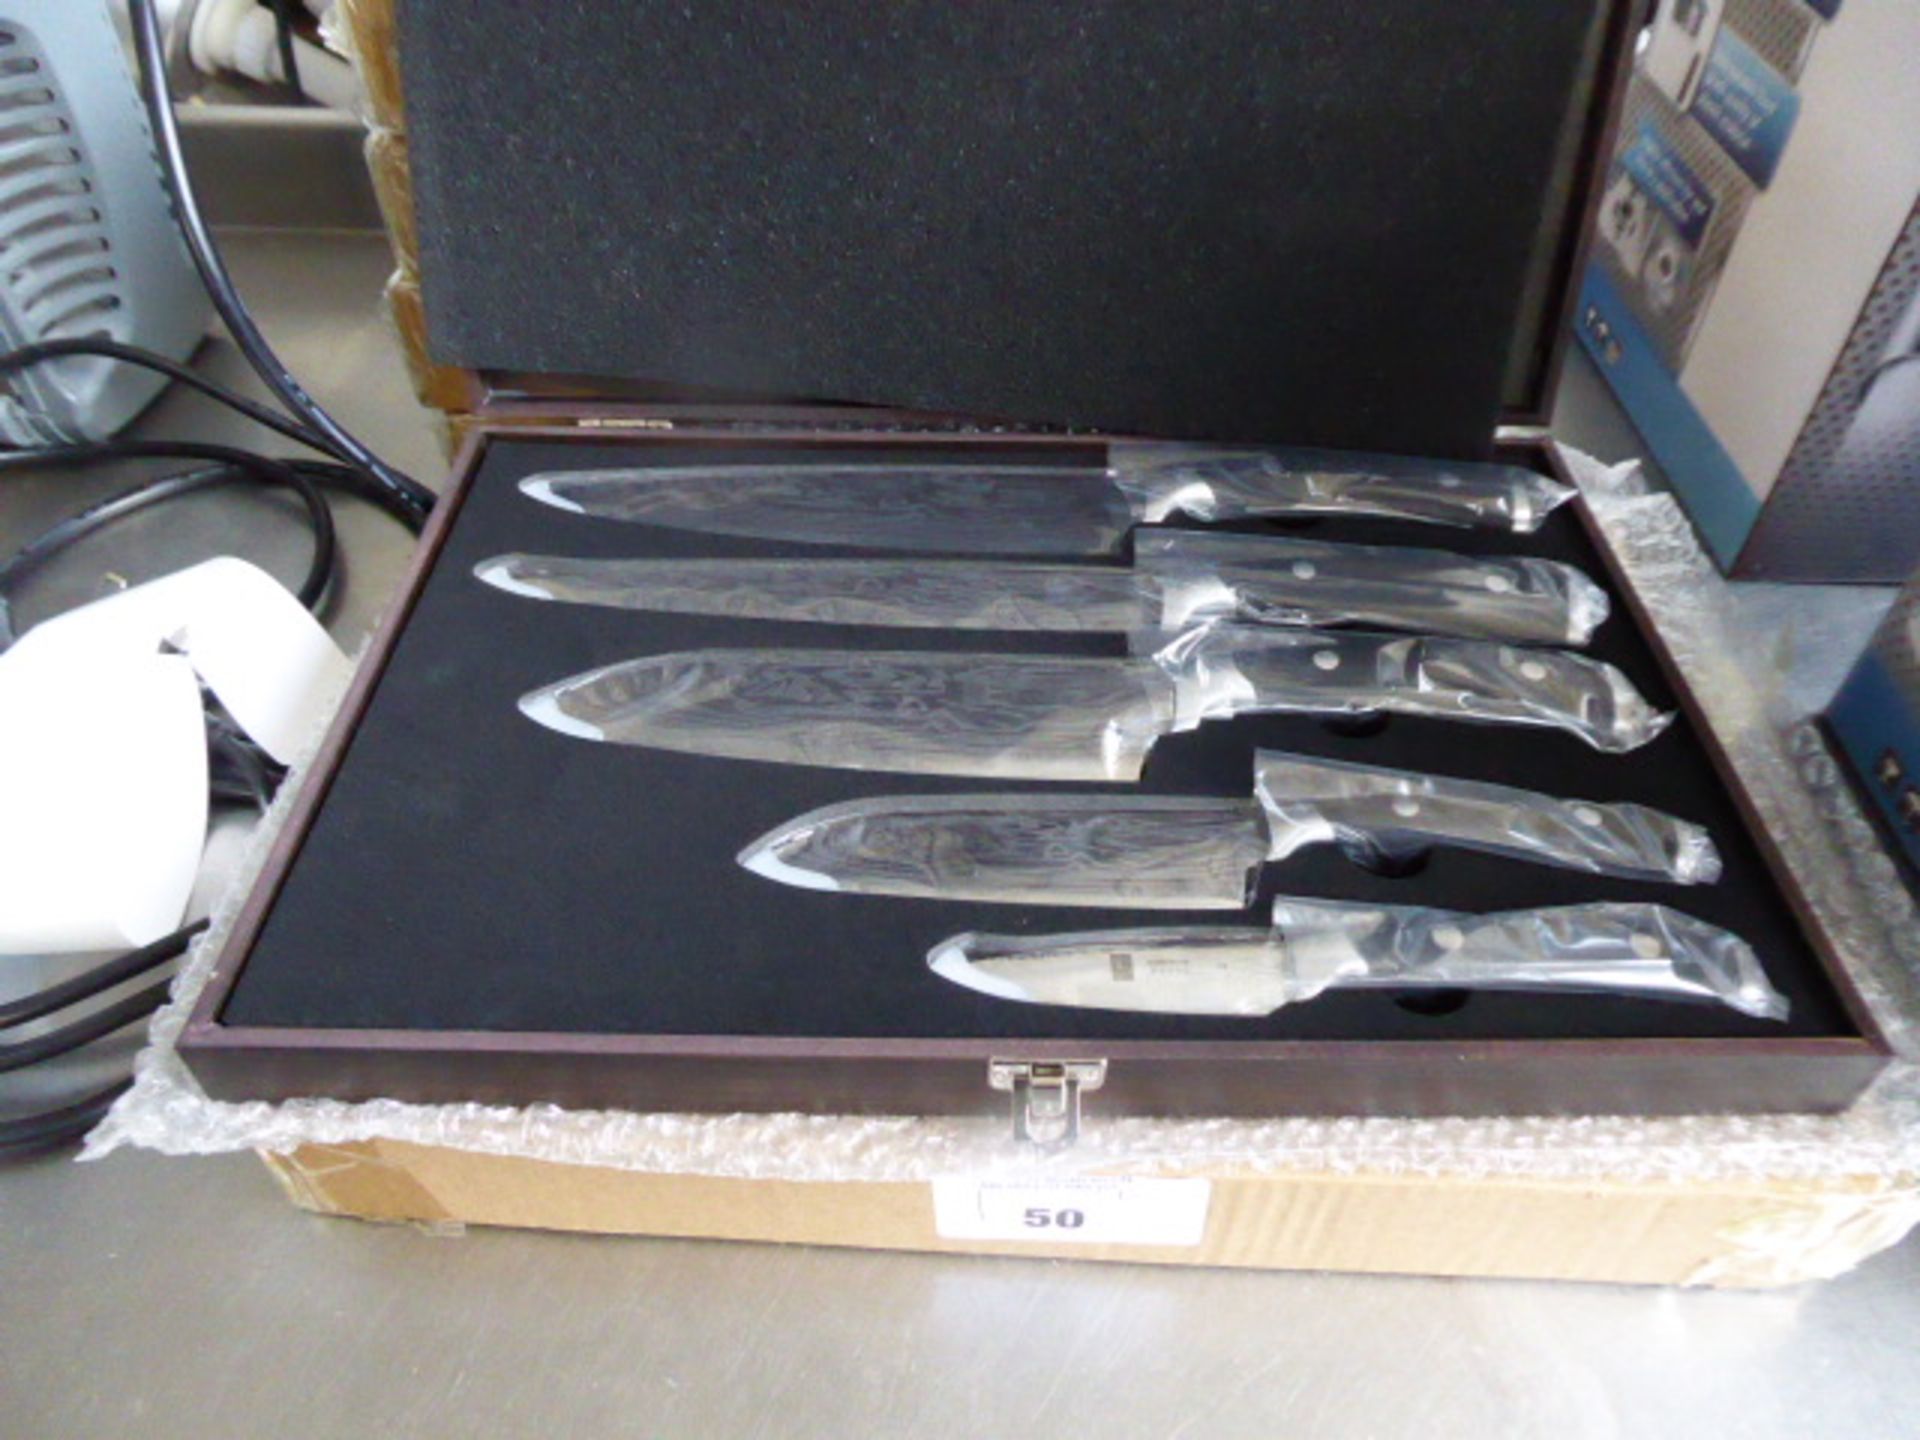 Case of 5 Kyoto Damascus knives in presentation box